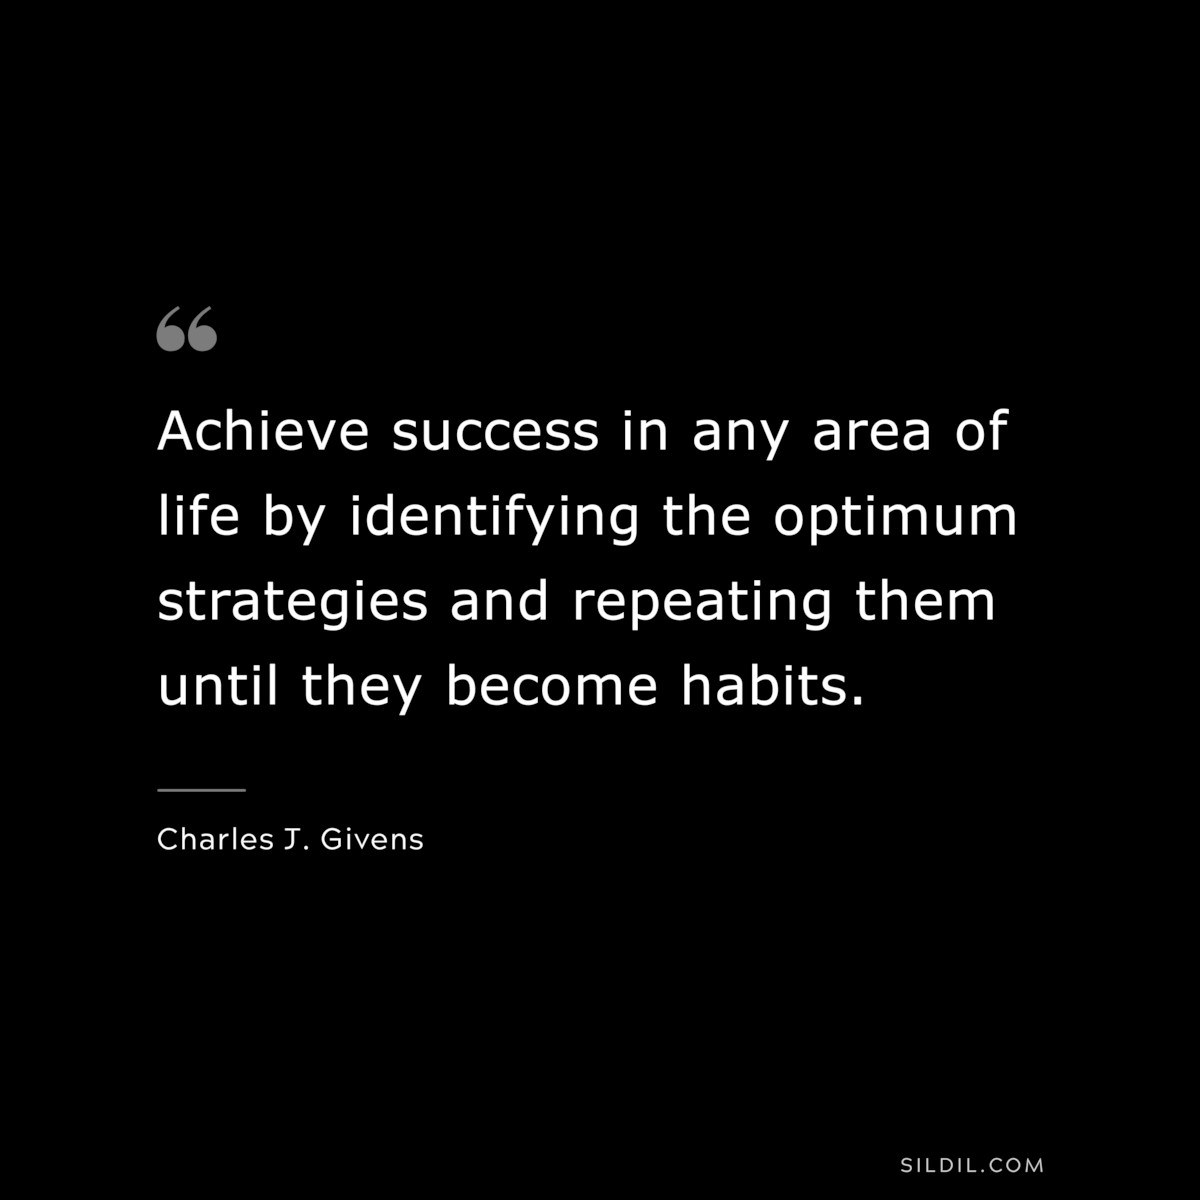 Achieve success in any area of life by identifying the optimum strategies and repeating them until they become habits. ― Charles J. Givens